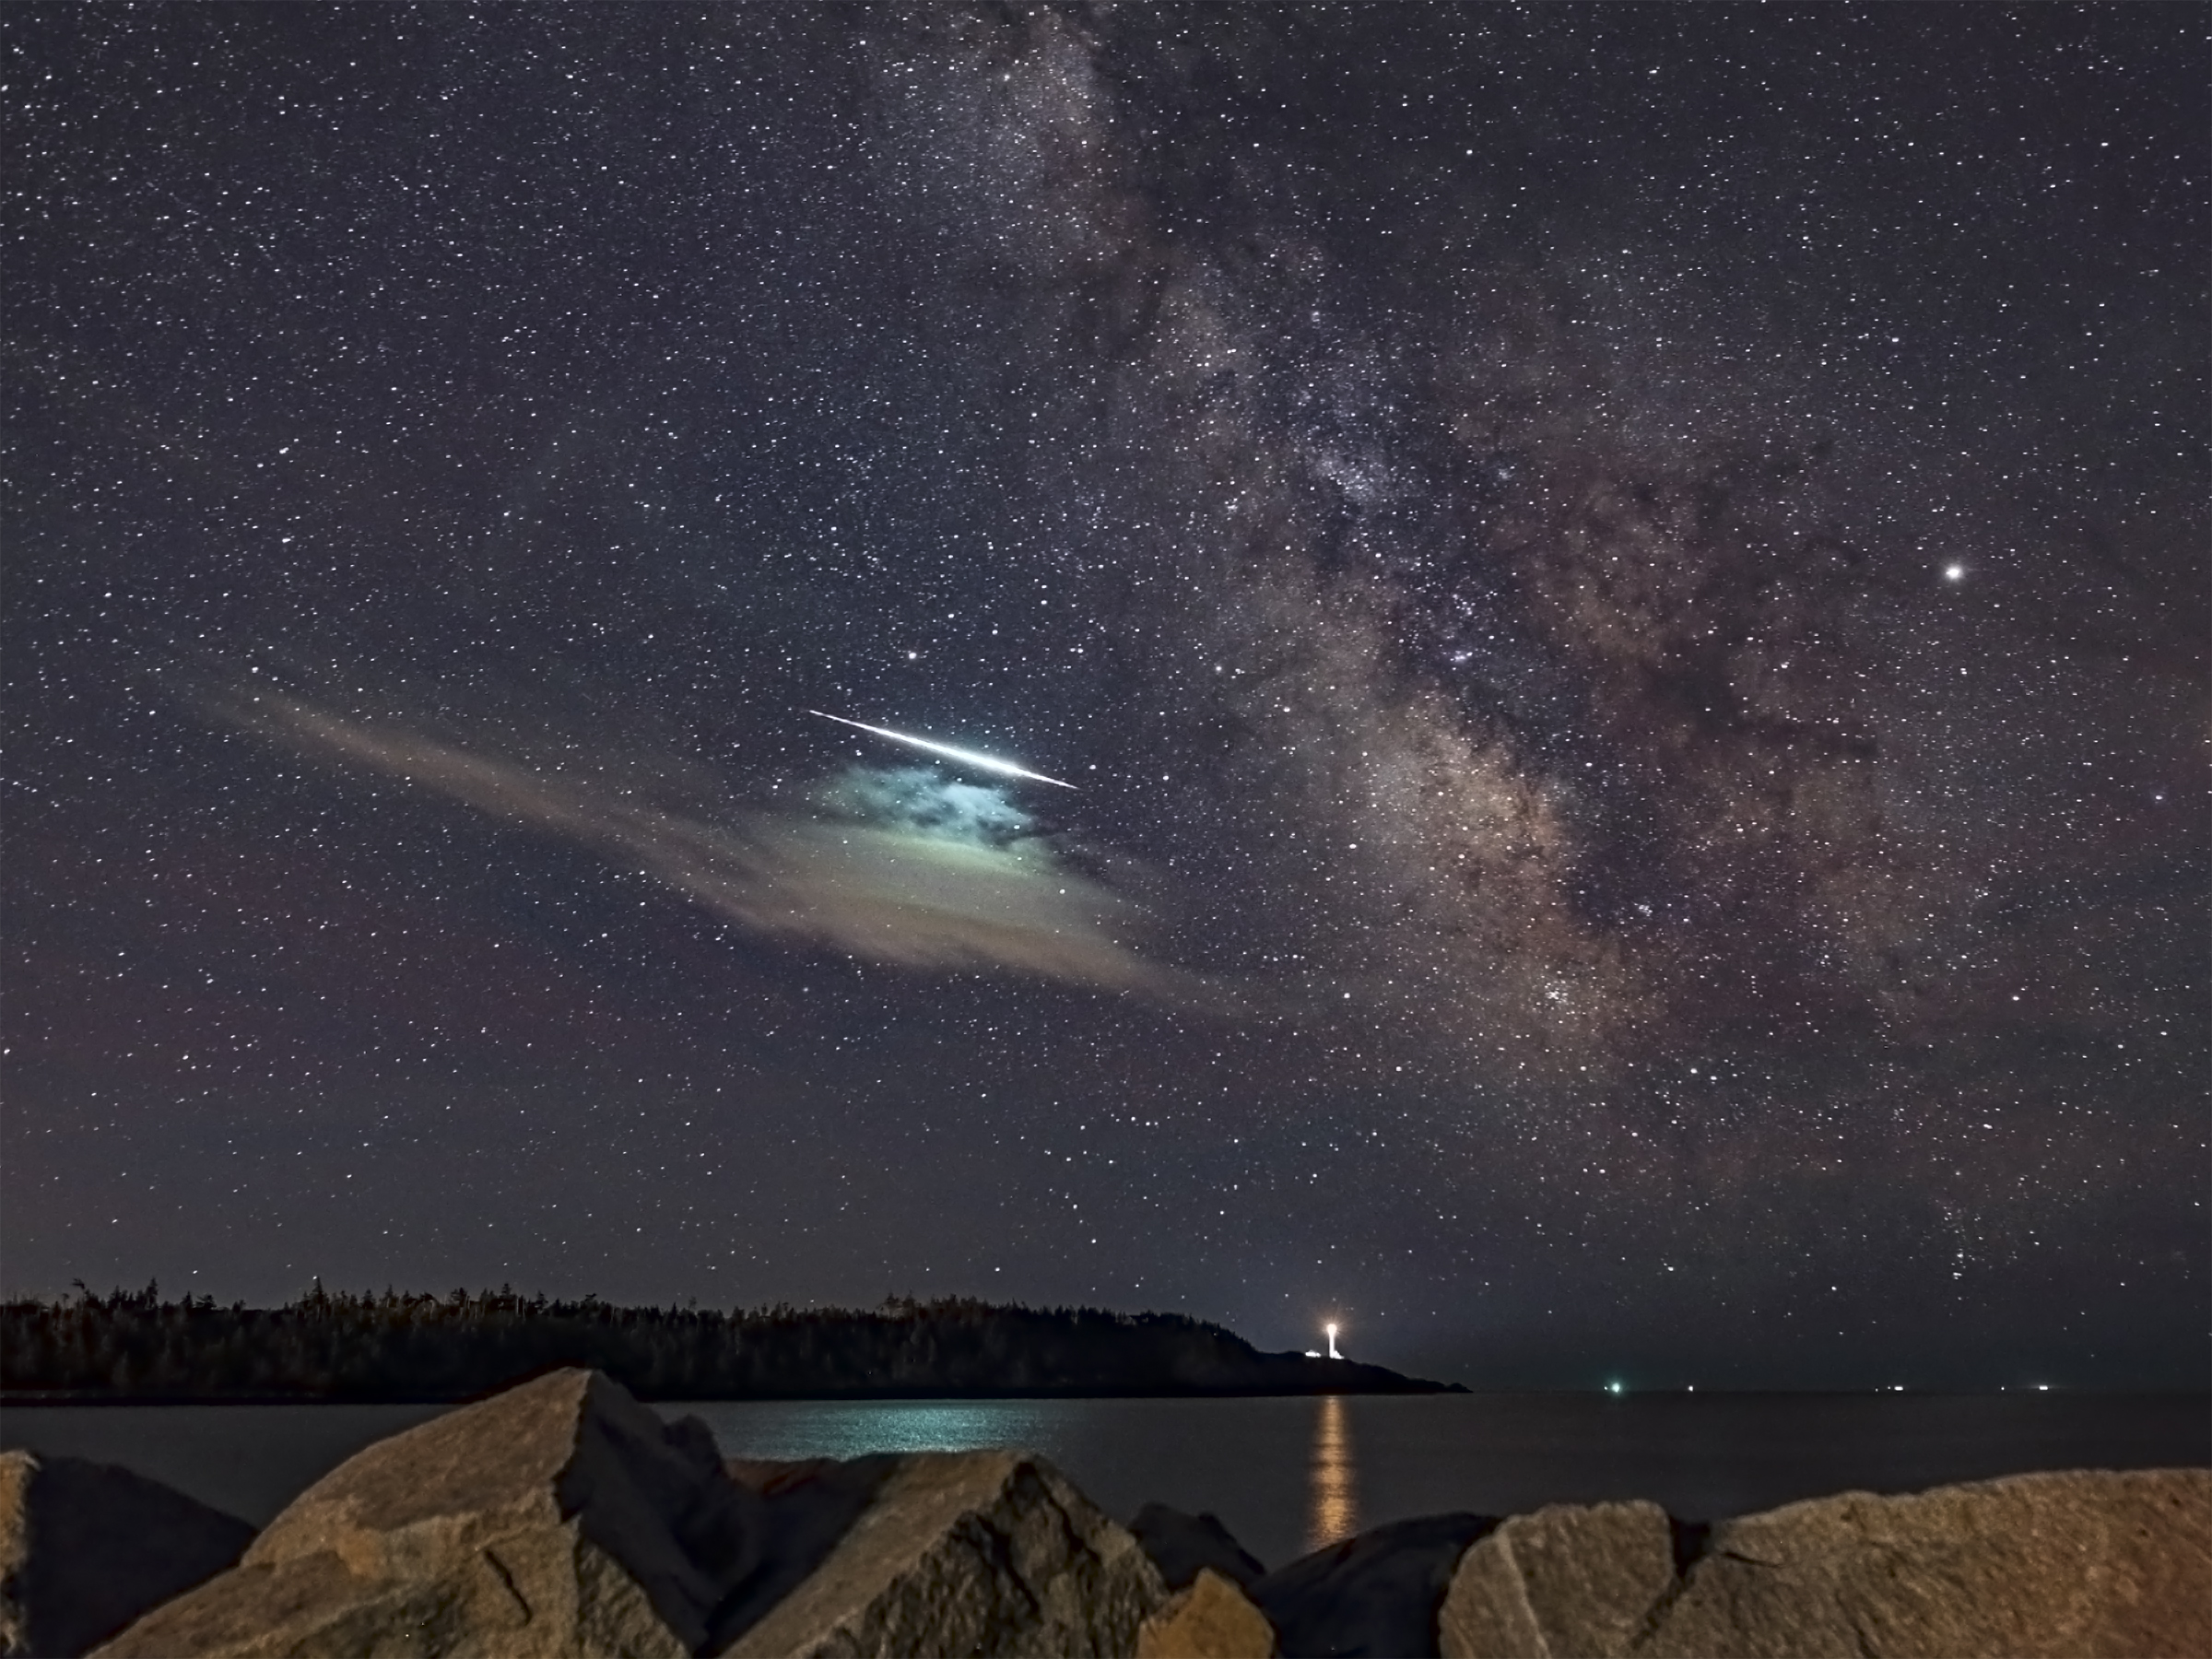 Image Title  - Fireball Meteor  What the object is - Meteor        Pertinent details - unplanned capture! I was shooting the Milky Way and the meteor photobombed the shot. It appears to have travelled horizontally above a cloud, which gives a helicopter effect. The green colour was pretty intense.   Location - Outer False Harbour near Cape Forchu lighthouse, Yarmouth County, NS  Time - July 2, 2019 at approximately 12:39:28 AM; my camera clock settings were "off" so I tried to correct the data by using a universal time clock.    Camera - Canon 6D  Settings - 20.0 seconds exposure, F/2.0. ISO 1600.  Lens - Sigma 20mm F/1.4 DG HSM Art on a Canon mount  Tripod, no tracker used  Processed in Photoshop CC from TIFF file with basic adjustments to brightness, contrast, shadows, dehaze, colour balance, luminance, saturation, noise and so on. Cropped to required size. 